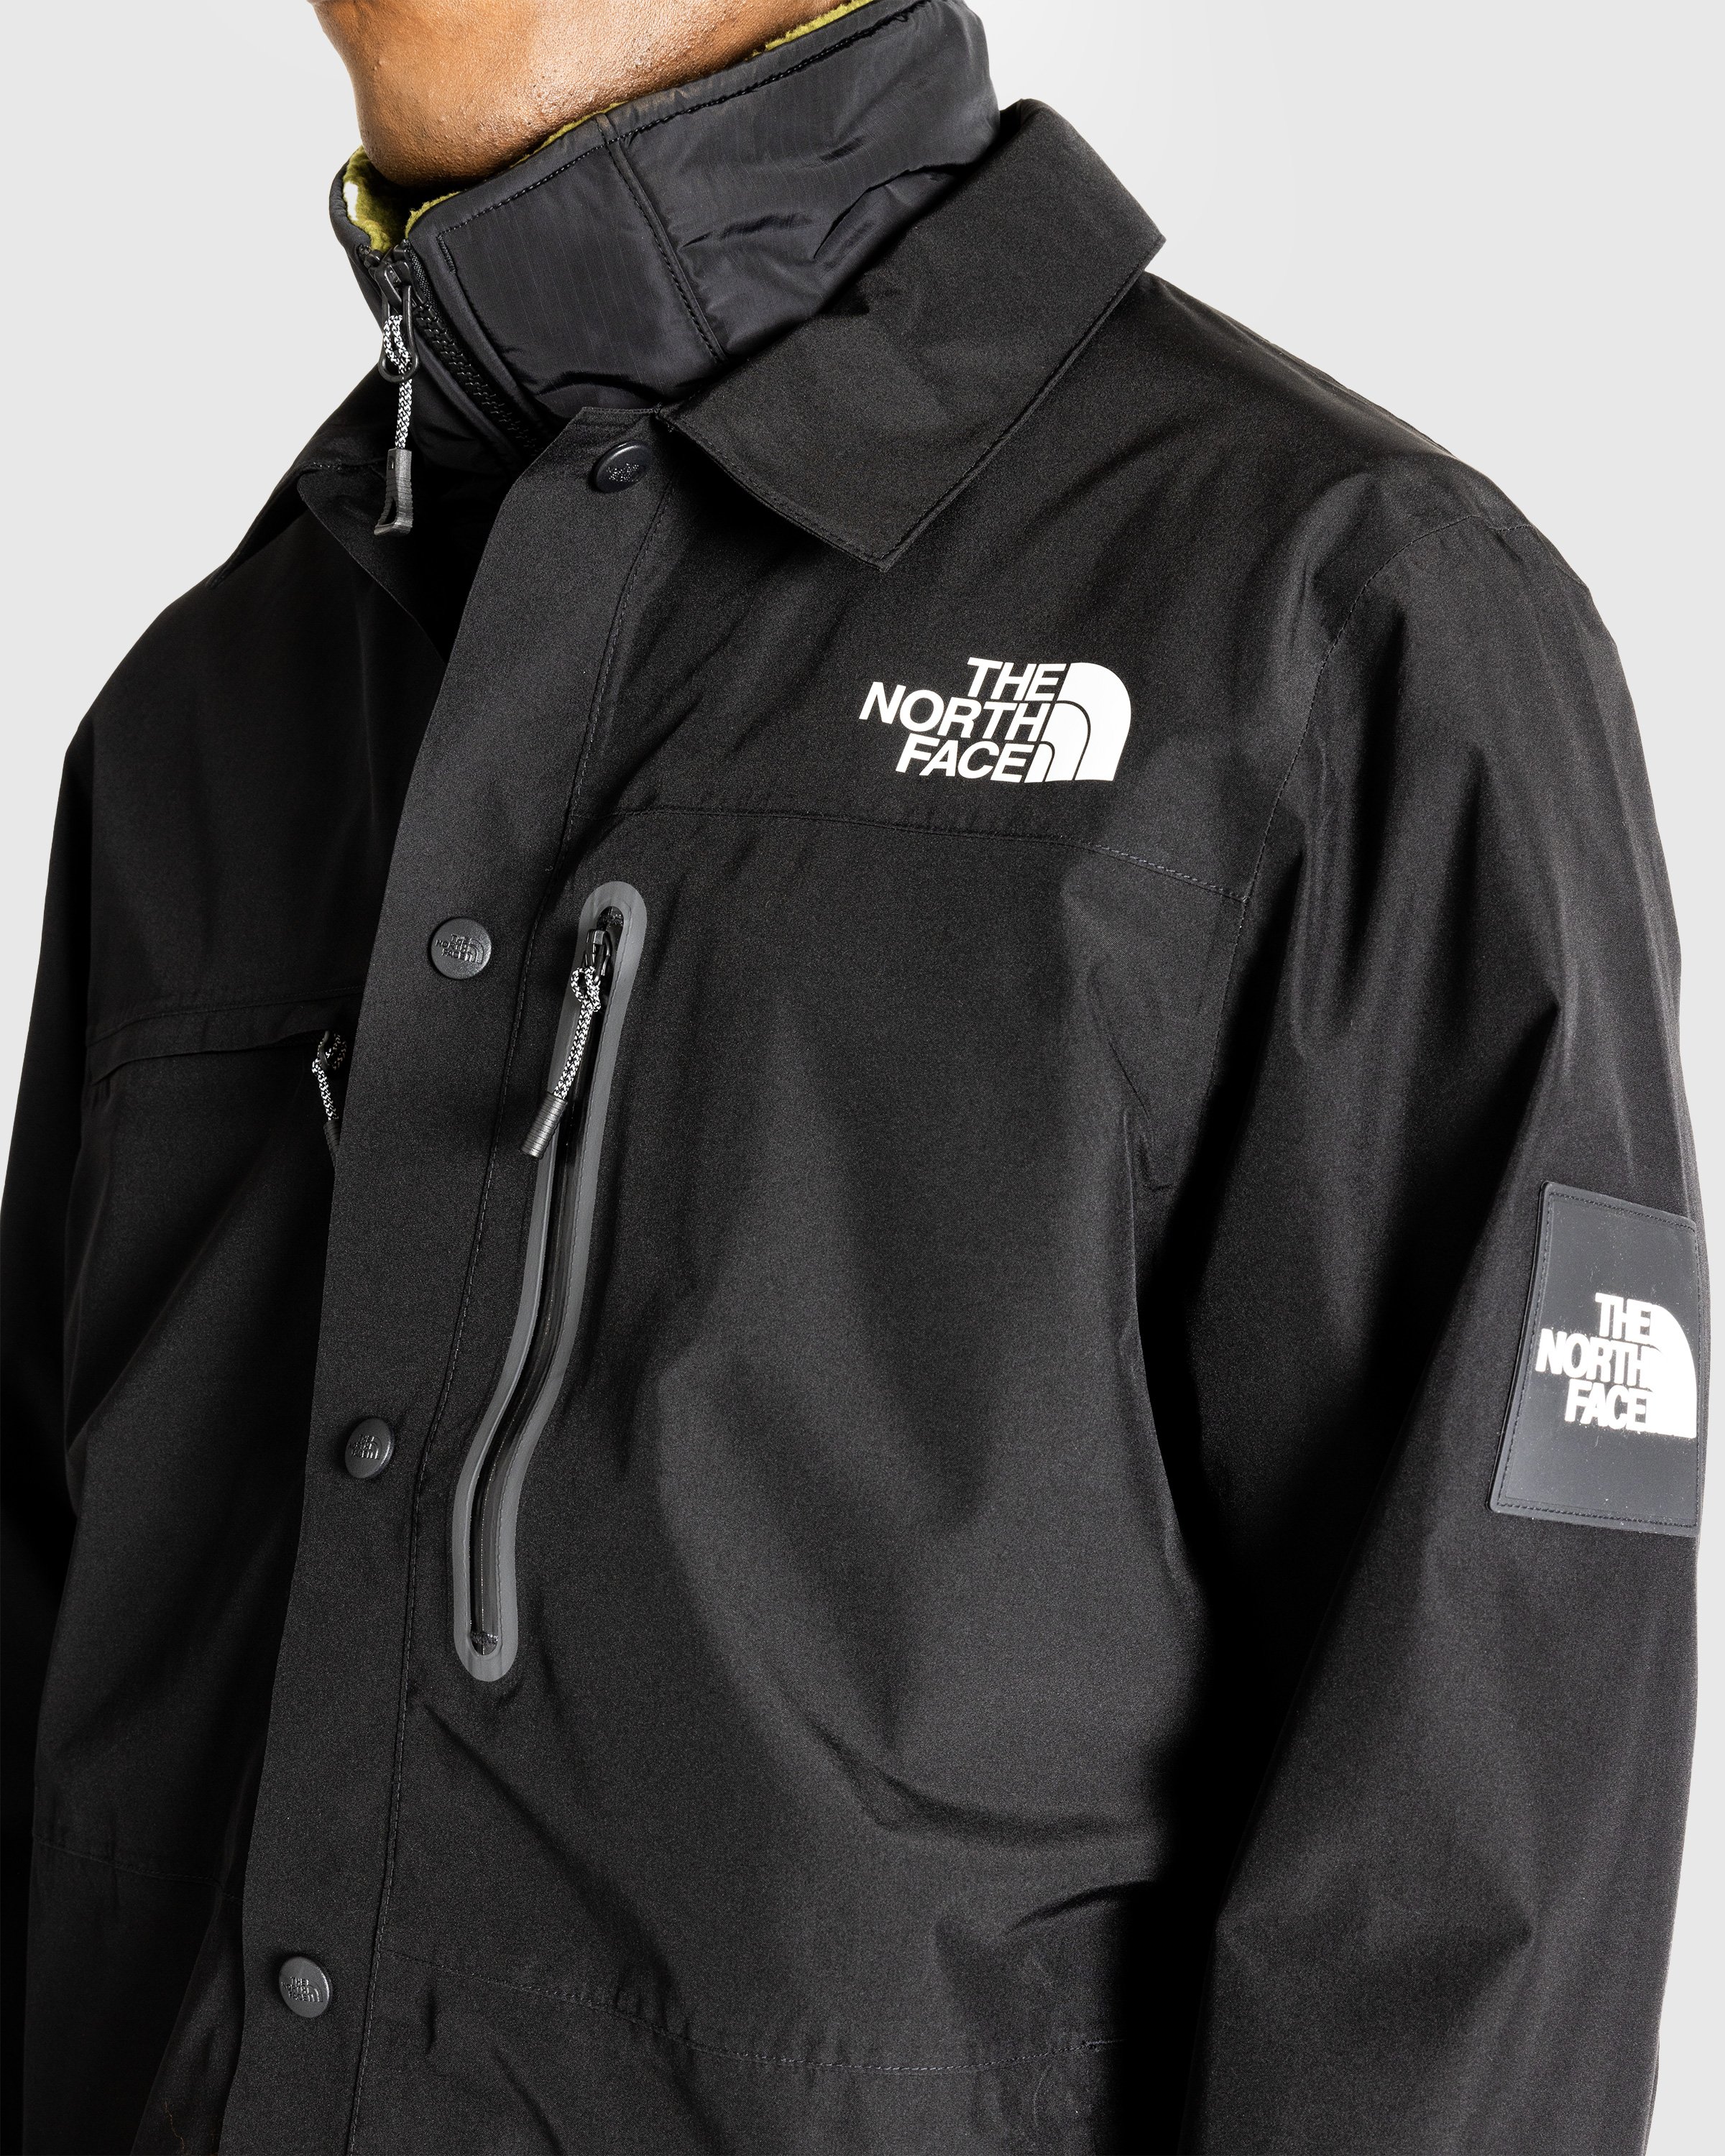 The North Face - M AMOS TECH OVERSHIRT TNF BLACK - Clothing - Green - Image 5